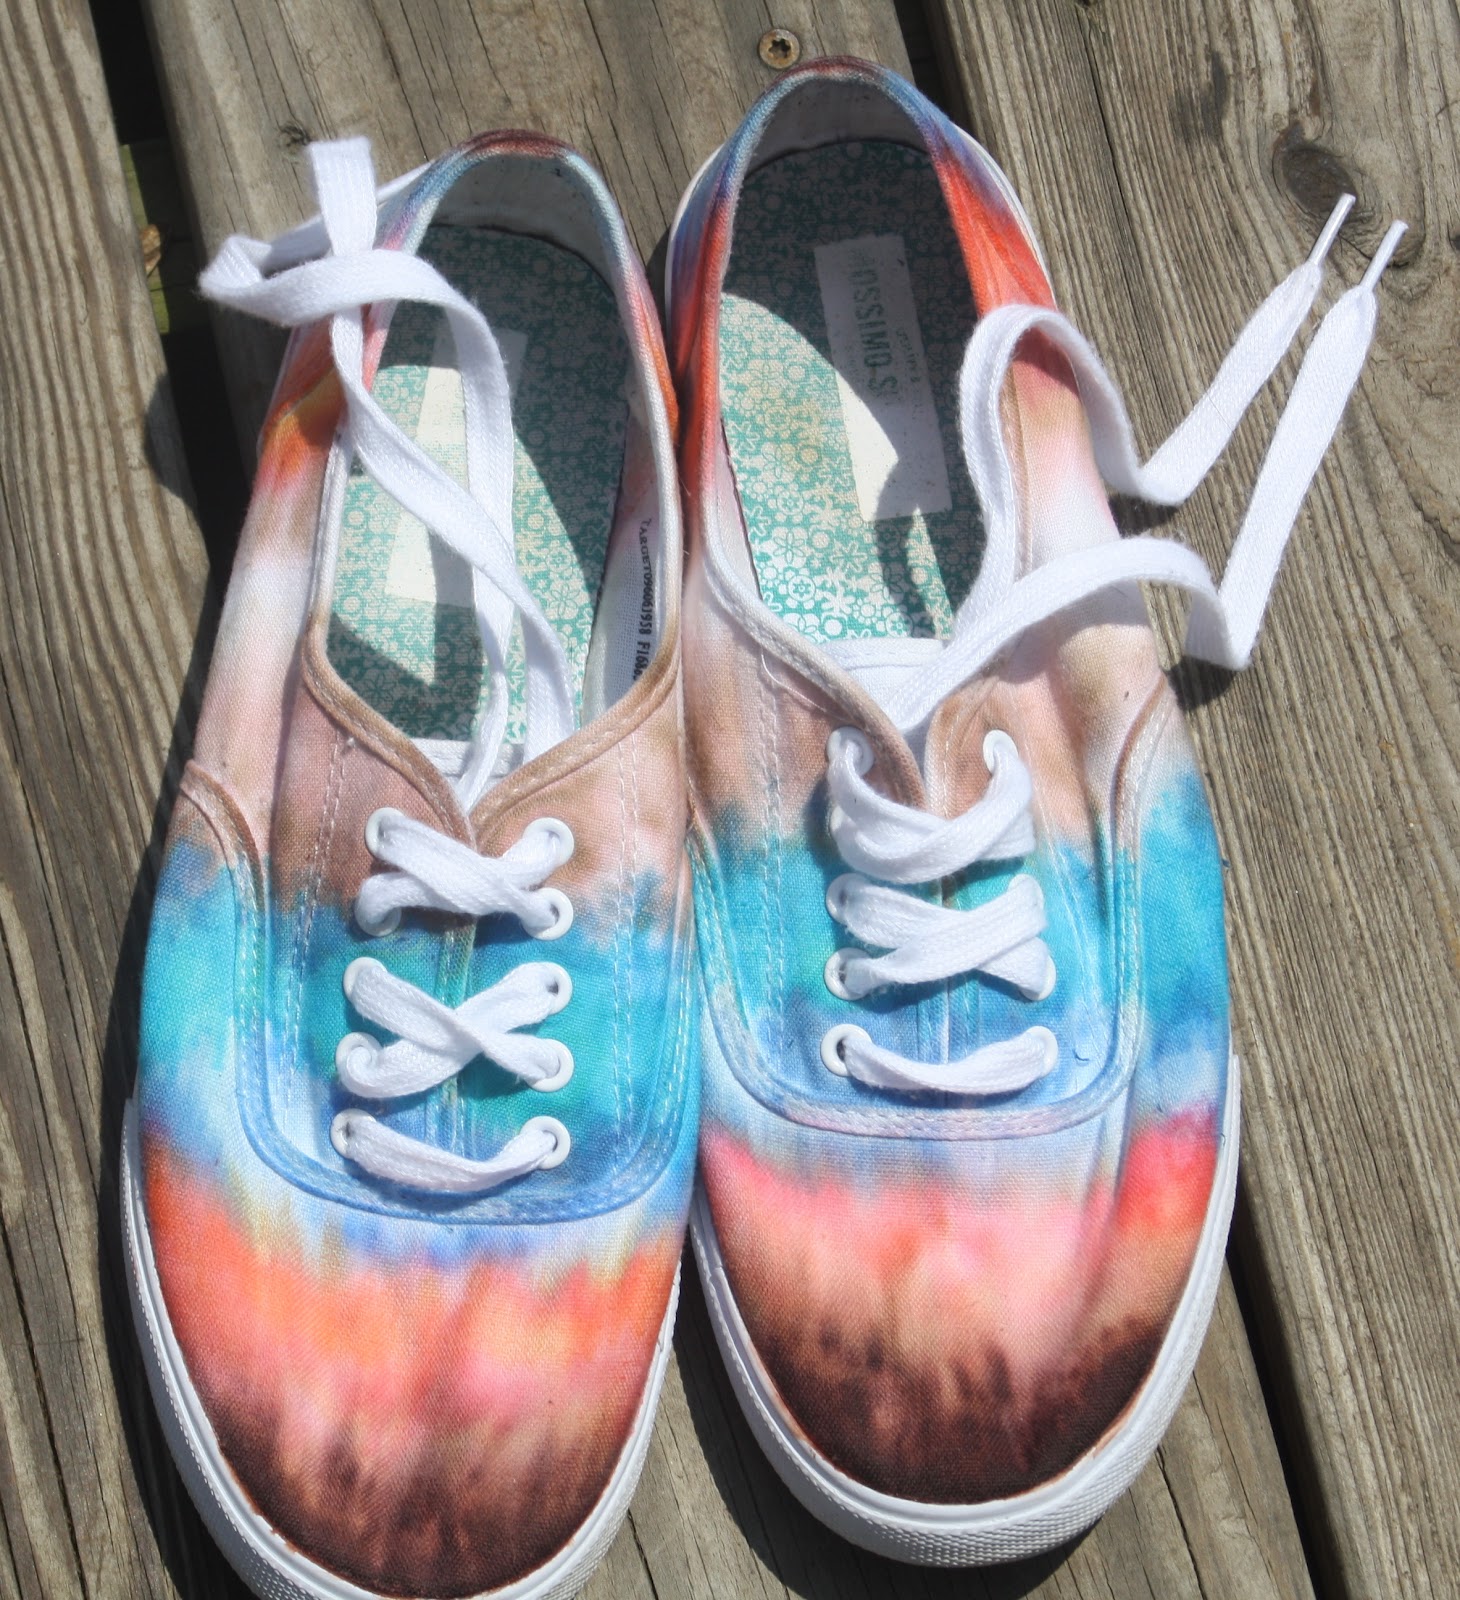 How to Dye Canvas Shoes - MomAdvice